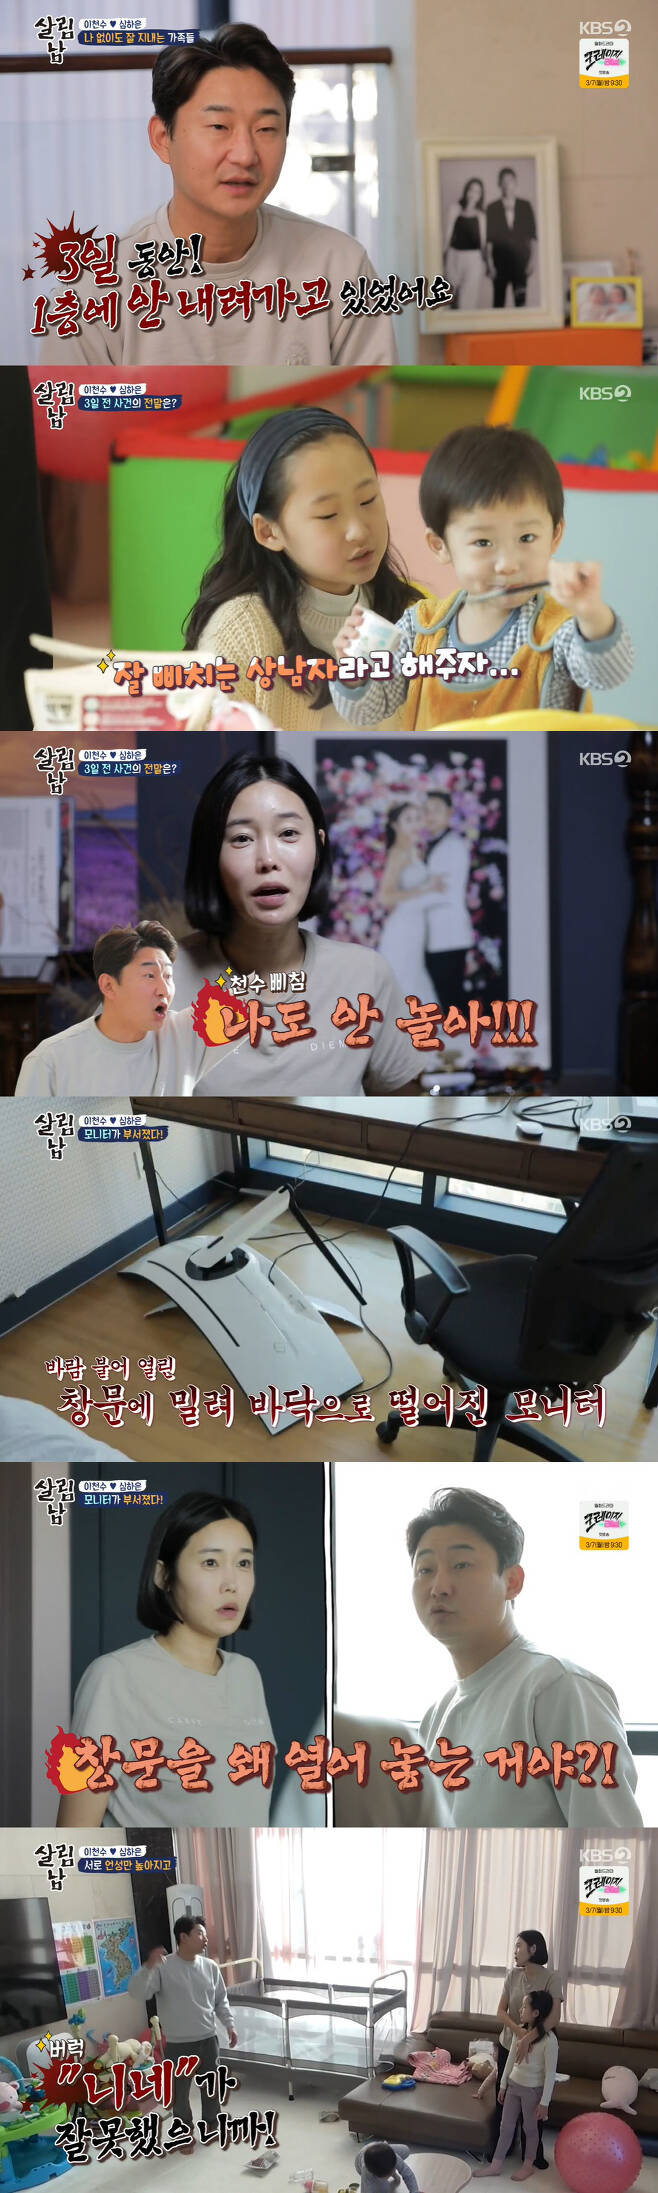 Former footballer Lee Chun-soo has been in conflict with wife Shim Ha-eun over a marital fight.On KBS2s Saving Men Season 2 (hereinafter referred to as Mr. House Husband 2) broadcast on the 19th, a day of the new Salimnam Lee Chun-soo was released.Lee Chun-soo, who was lonely while eating raw ramen alone on the second floor of his double-story home, said, If you do not have a schedule, you will watch TV in your room.On the first floor, his wife, Shim Ha-eun, was looking after her three children; Lee Chun-soo said, I am not going down on the first floor because of the behavior of my big daughter, Ju-eun.I was in the room for three days. There is no big problem. There is a bathroom on the second floor. When my husband is sprained and sprained, I go to the room; Ive seen soothing before, but its too much from when, its hard after twin births, Shim Ha-eun said.I was excited because my acquaintance promised to ride a bicycle with Ju-eun, but suddenly my husband was excited and wore equipment and came down.When I told him that he was not going, he said,  (my husband) says, Ya, Im not playing! He was embarrassed by his appearance. Lee Chun-soo, who ordered delivery food without knowing his family, sneaked down to the first floor to get food, but she was found by Yang, and she said, Mom!Father ordered delivery food. Lee Chun-soo ate alone and said, Why does the gift go to my mother? Why do you stand for her?I was sad.A moment later Lee Chun-soo suddenly began to annoy, calling out his wifes name loudly, then pointed to a broken monitor pushed by an open window.Lee Chun-soo said, Its a 1.7 million won monitor Ive never written before, and after two months of setting, I decided to write it now, but I fell down.I was so upset, he said. Why do you keep the door open without cleaning? The house worker is not checking it and doing what.Shim Ha-eun expressed his injustice, saying, Im not even coming in here, Im not opening the door. The tone grew louder, and Shim Ha-eun said, Its a big deal, be quiet.Why are you shouting? said Furious Lee Chun-soo, who also roared at Ms. Zueun, saying, What are you saying because youre wrong?Lee Chun-soo told the production team, Im a spitting style without thinking, and when I talk, I put Ya on it. This is a habit.Shim Ha-eun told Ms. Ju-eun, I wish I could think and tell you why Im angry... I think Ive been a strong speaker of athletic life.We need to talk to Father more. Jun showed a sense of touching Mom is hard? Do not be hard. Shim Ha-eun went to Lee Chun-soos room and said, I went to an angry state and had nothing to say. If I felt bad, I said you without hesitation.Then the children are scared. Lee Chun-soo said, Im lonely and hard. You guys dont even think of me. Did you care if I died here for three days?Shim Ha-eun shouted: Take good talk with Ju-eun and reduce the screaming.I am doing well with the Feelings, but Lee Chun-soo said, I have done it several times. When opinions were not narrowed, Shim Ha-eun eventually shed tears; Ms. Zueun approached and comforted Shim Ha-eun.Shim Ha-eun said, I am so upset and my husbands tone hurts the arrogance I feel.Lee Chun-soo said: I live under one roof but I have Feelings, two families, I dont think I can permeate my family, my heart hurts so much.I want to be a good father good husband who communicates a lot, not just my husband. 